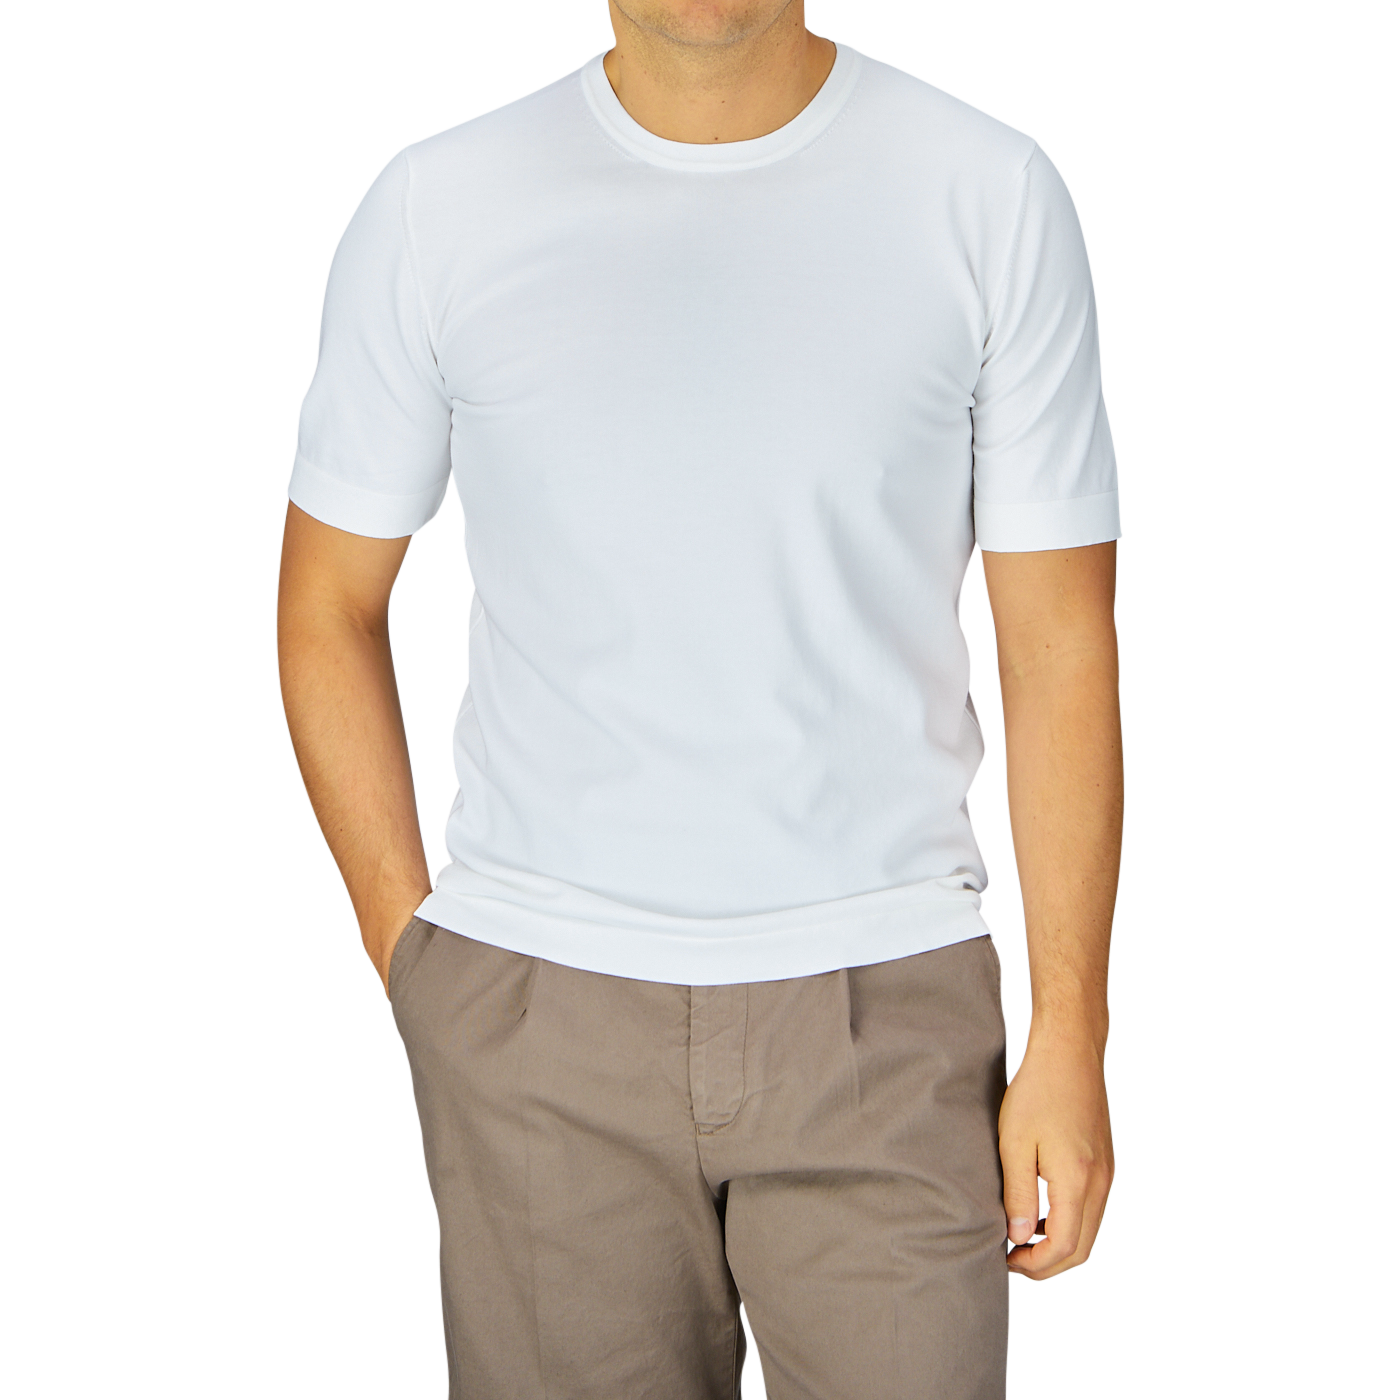 Man in a Gran Sasso Off-White Organic Cotton T-shirt and brown pants standing against a grey background.